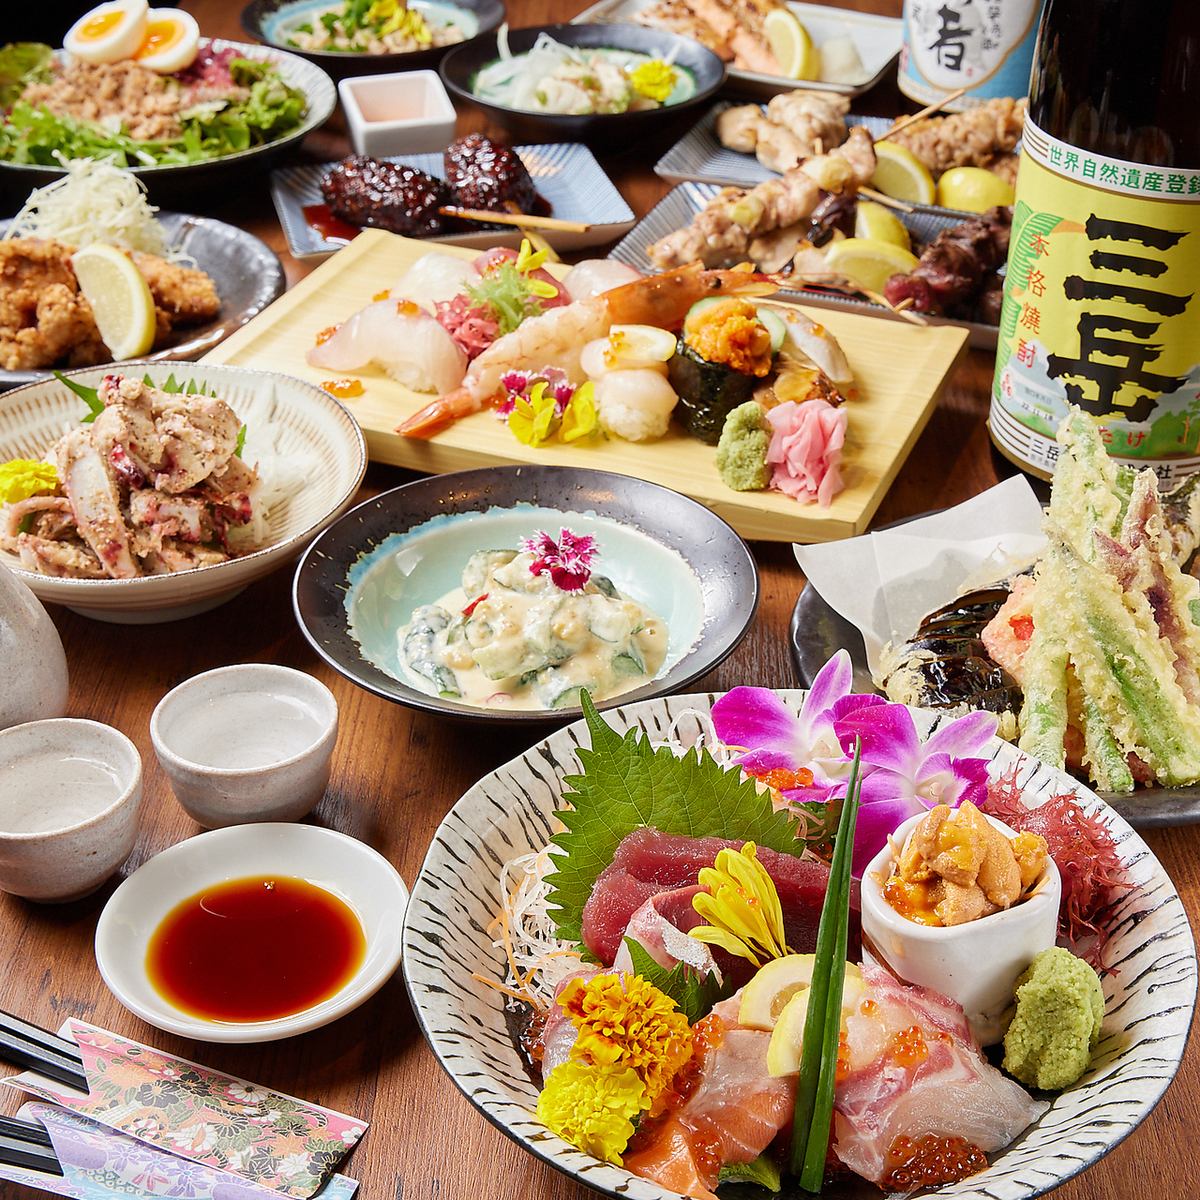 This is an all-you-can-eat restaurant that serves yakitori, sushi, and shabu-shabu★All-you-can-drink items are also available◎